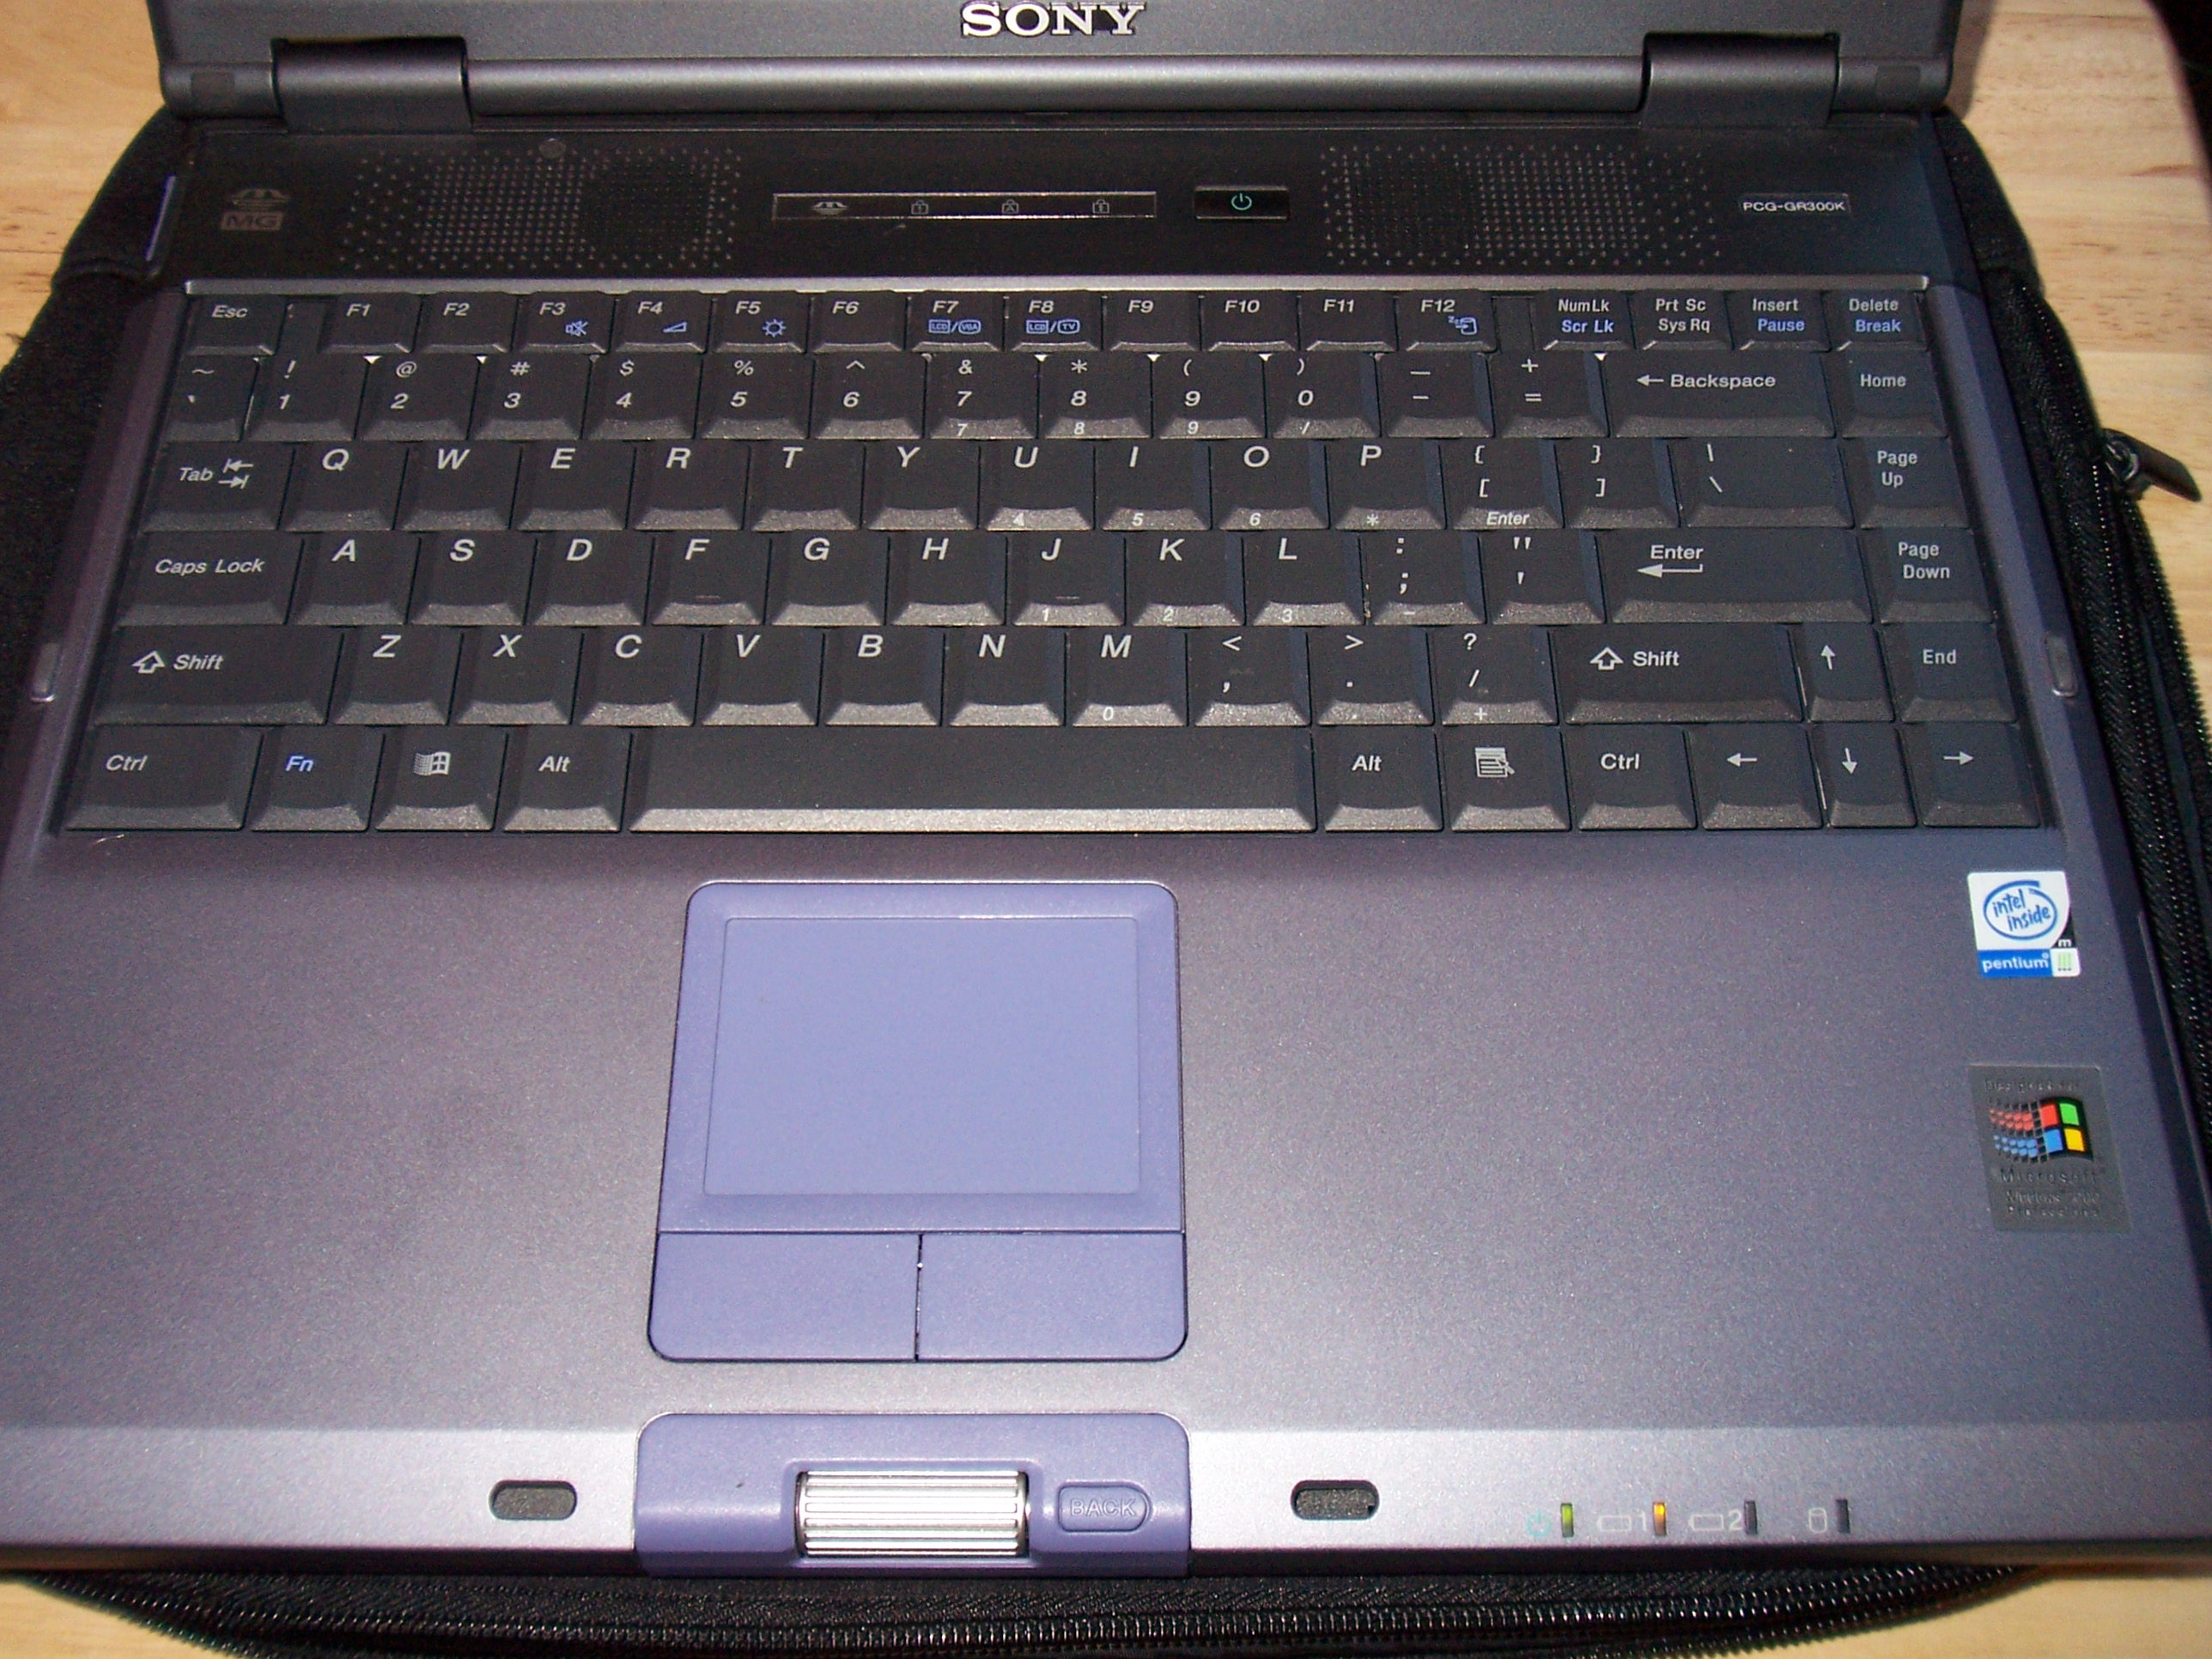 Sony Vaio Pcg 8y3m Drivers Download